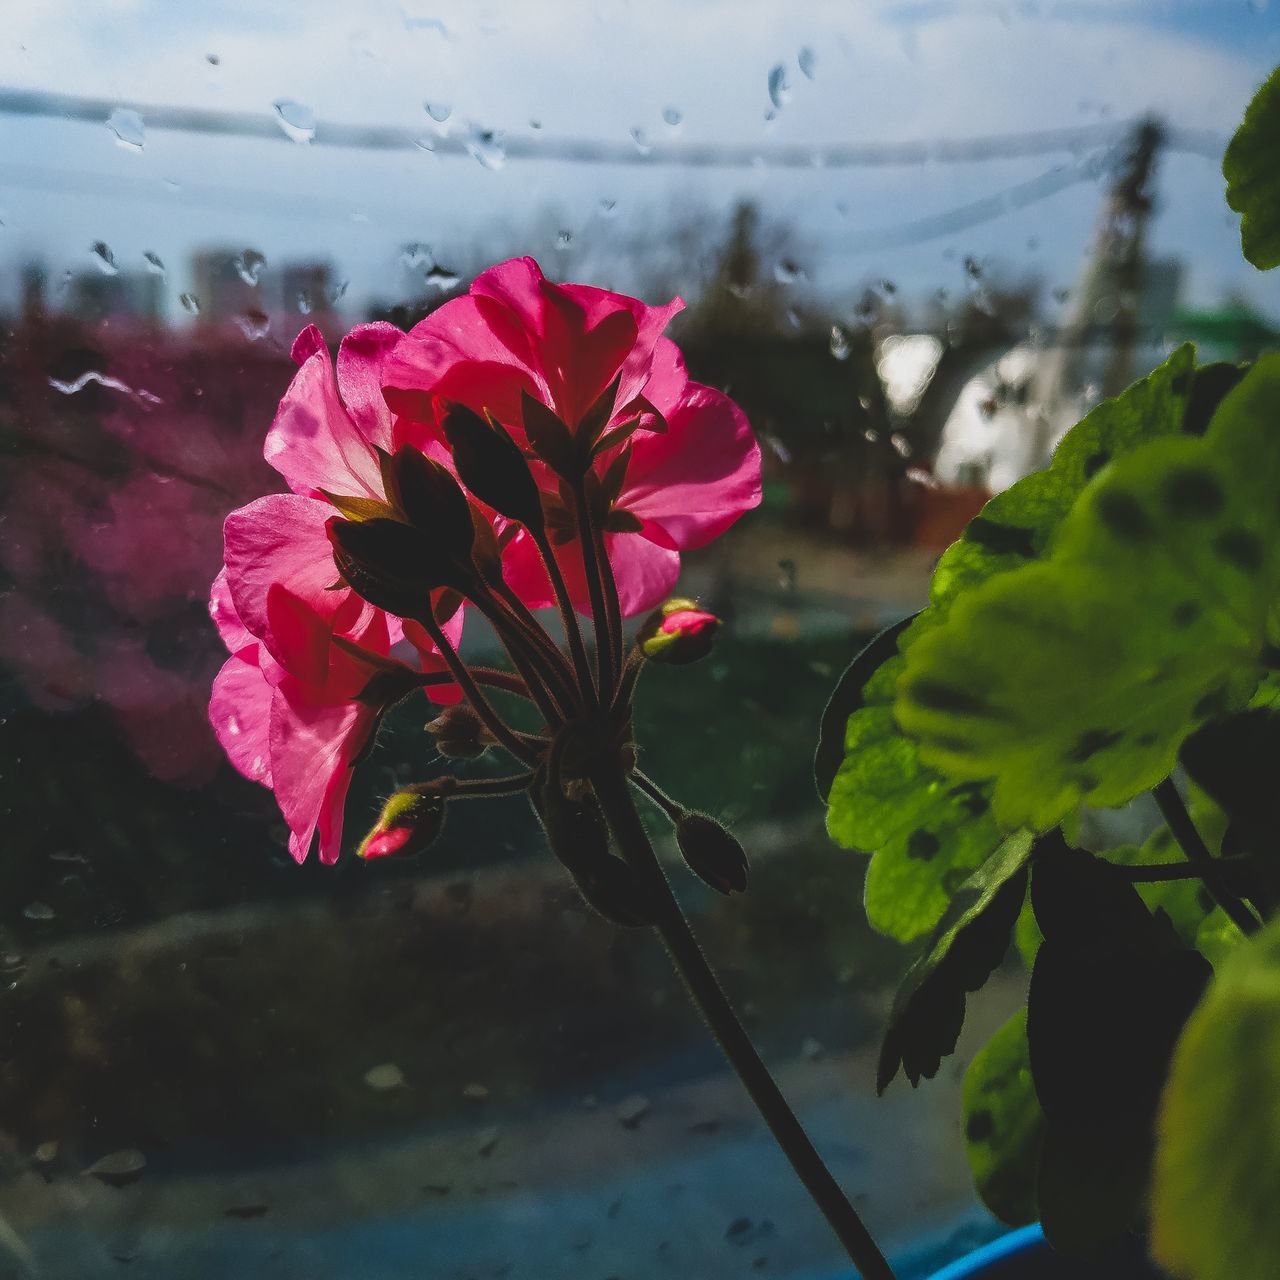 flower, flowering plant, fragility, plant, vulnerability, beauty in nature, freshness, petal, close-up, inflorescence, flower head, growth, pink color, nature, plant part, leaf, no people, focus on foreground, water, outdoors, raindrop